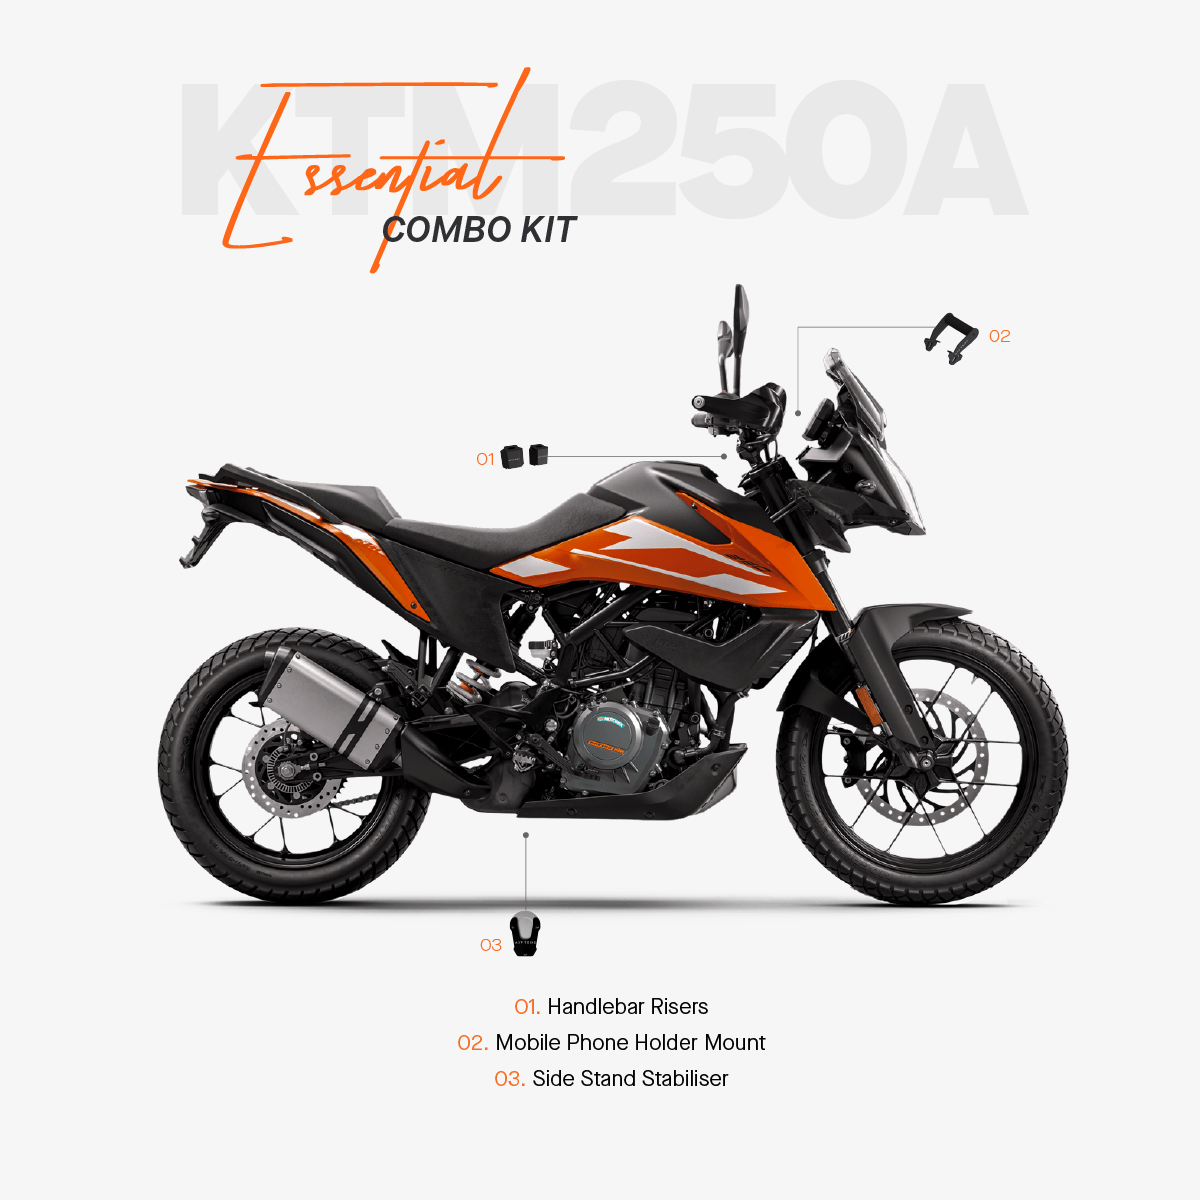 The Essential Combo Kit of 3 Accessories for KTM 250 Adventure